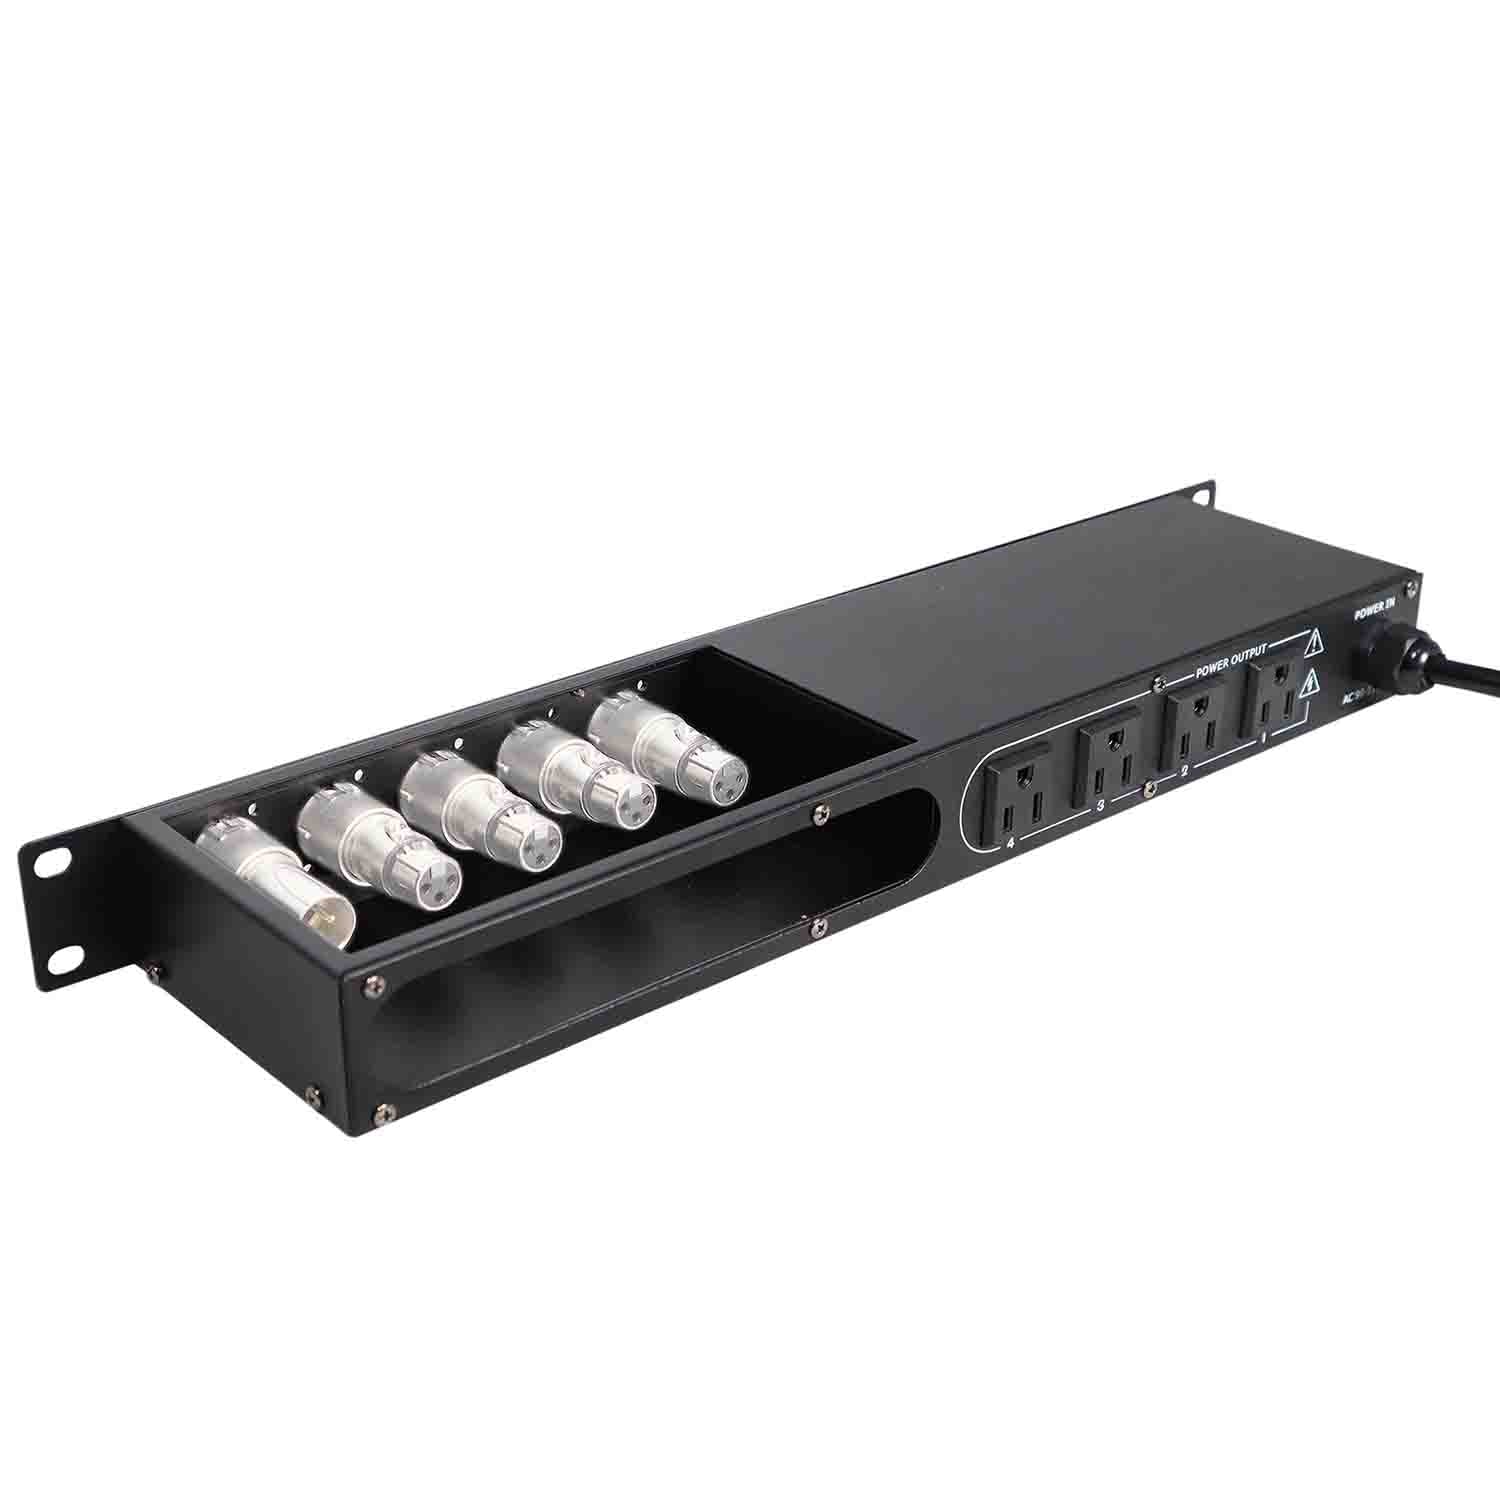 ProX X-PC4XLR-USB 1U 15 Amp Circuit 4CH Switch Panel W-2 USB and 5 Punched Space - Hollywood DJ